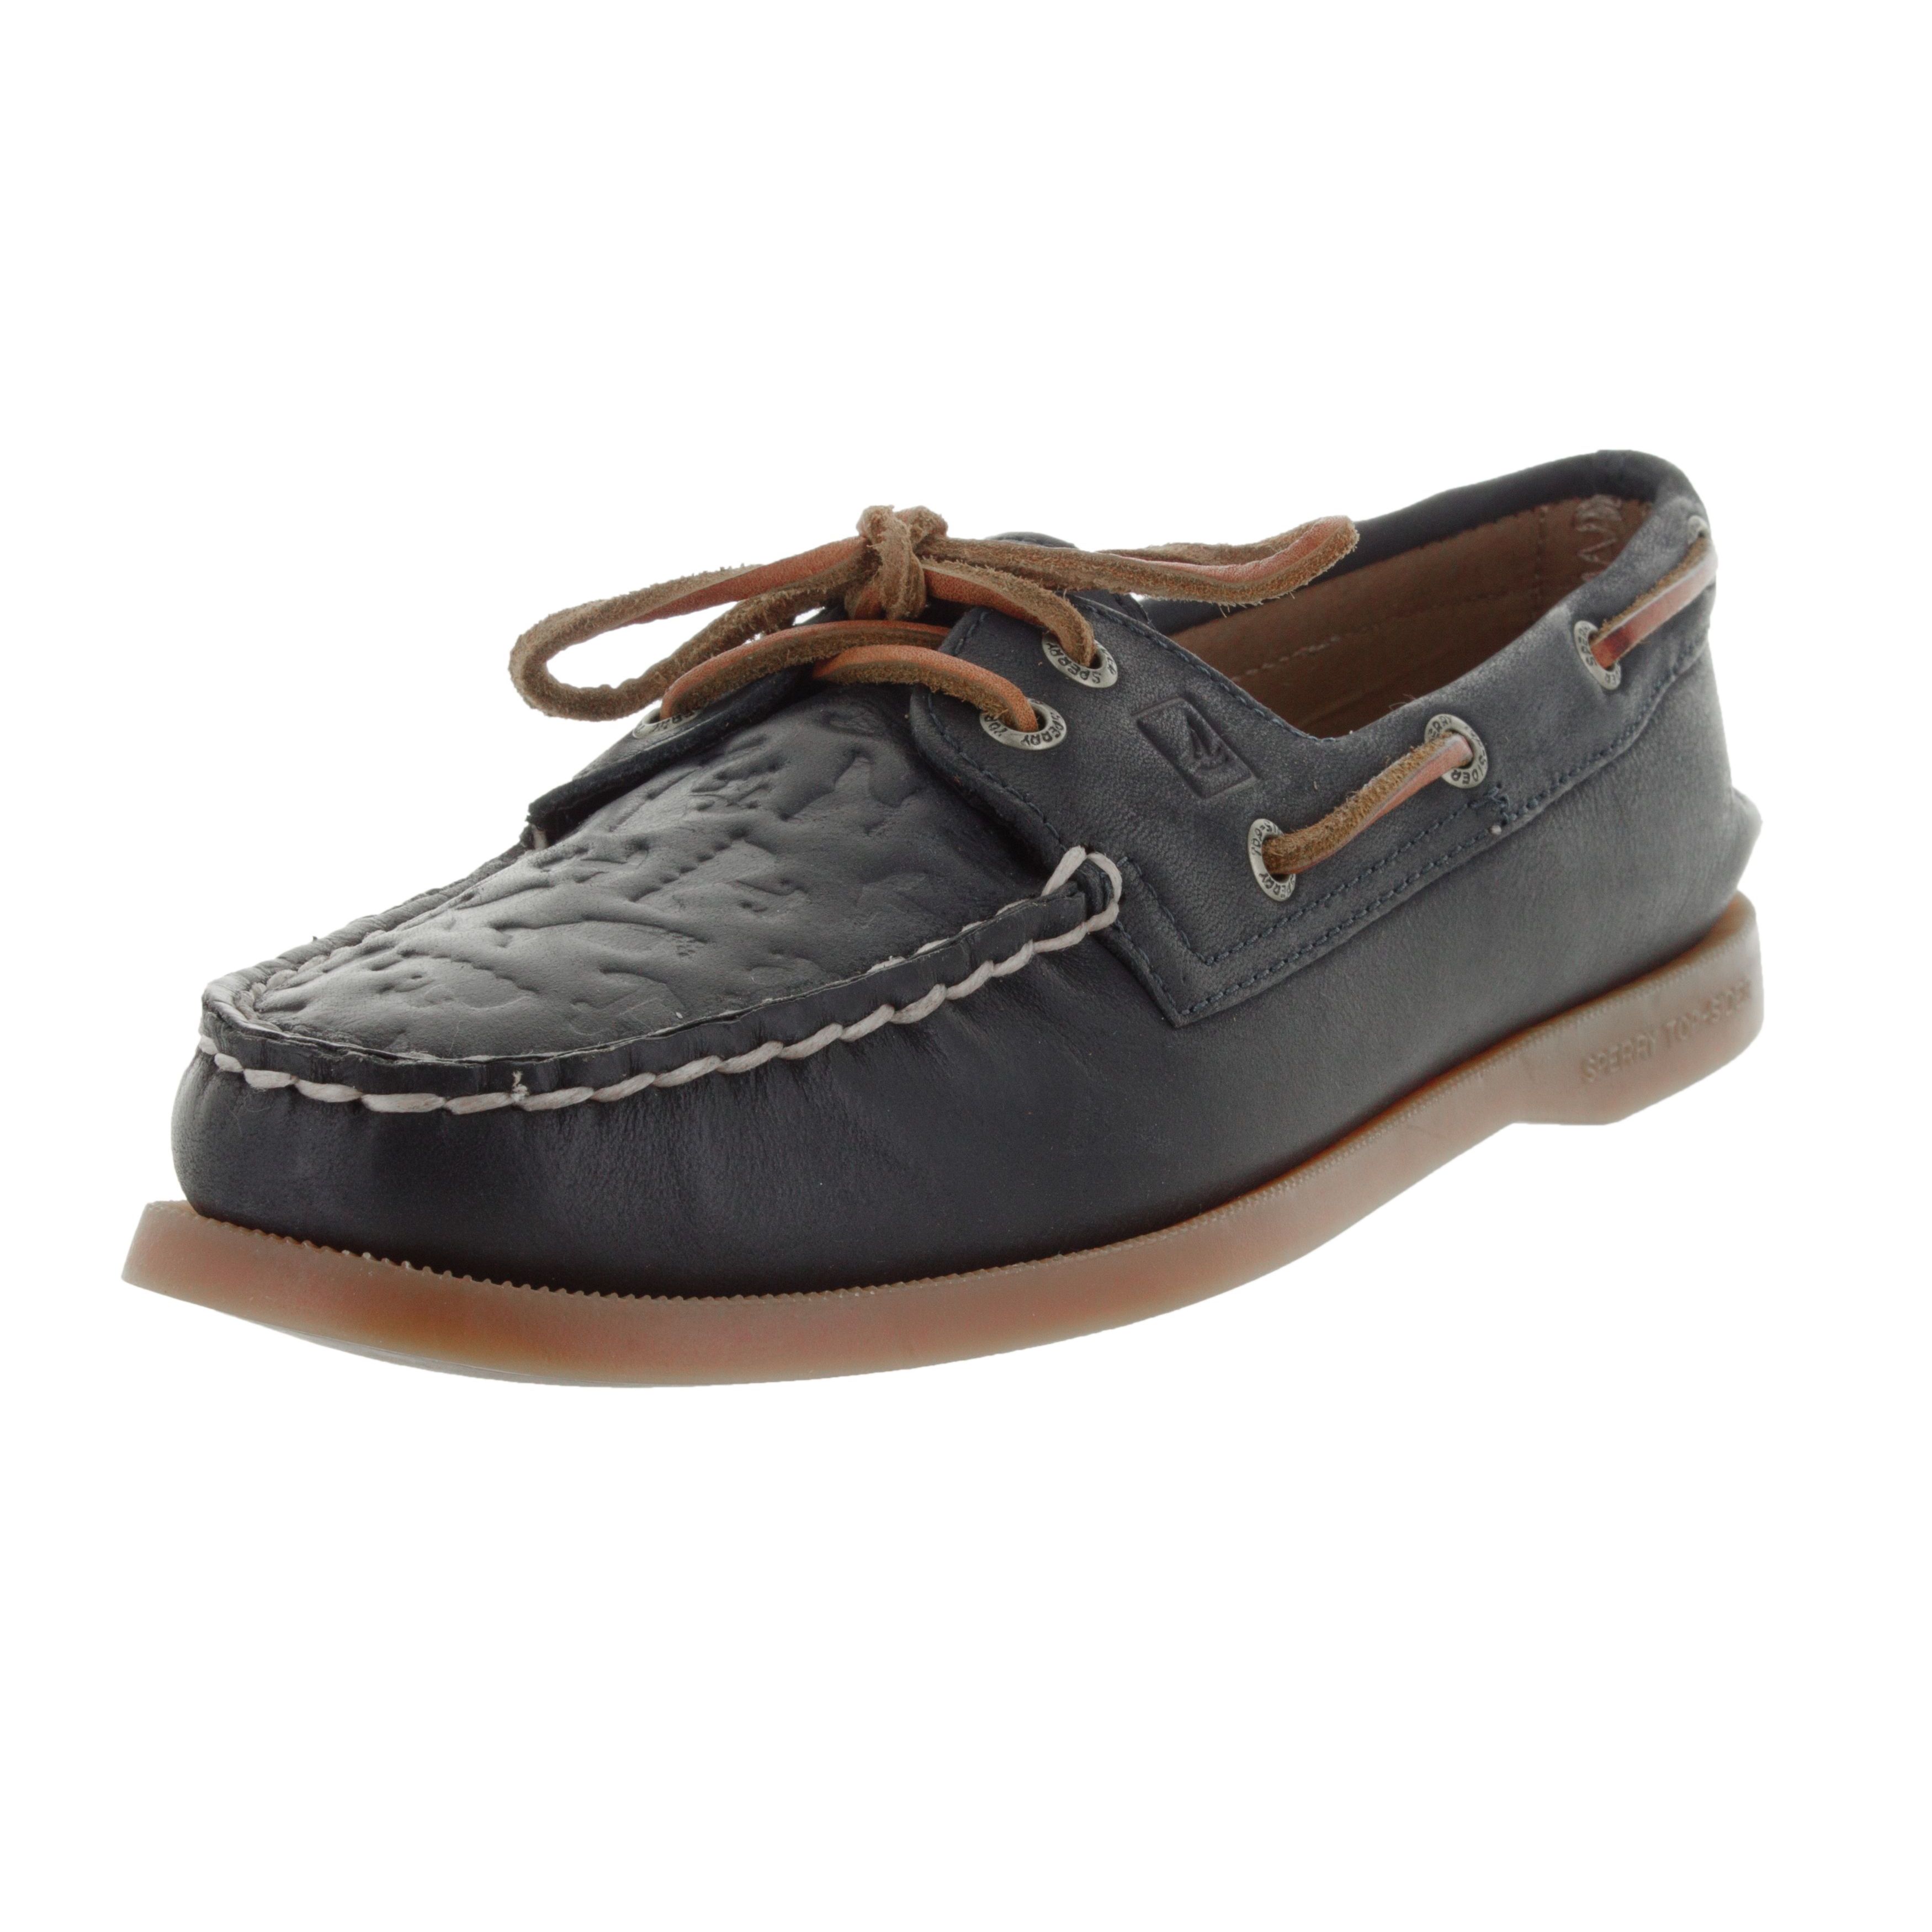 sperry women's boat shoes navy